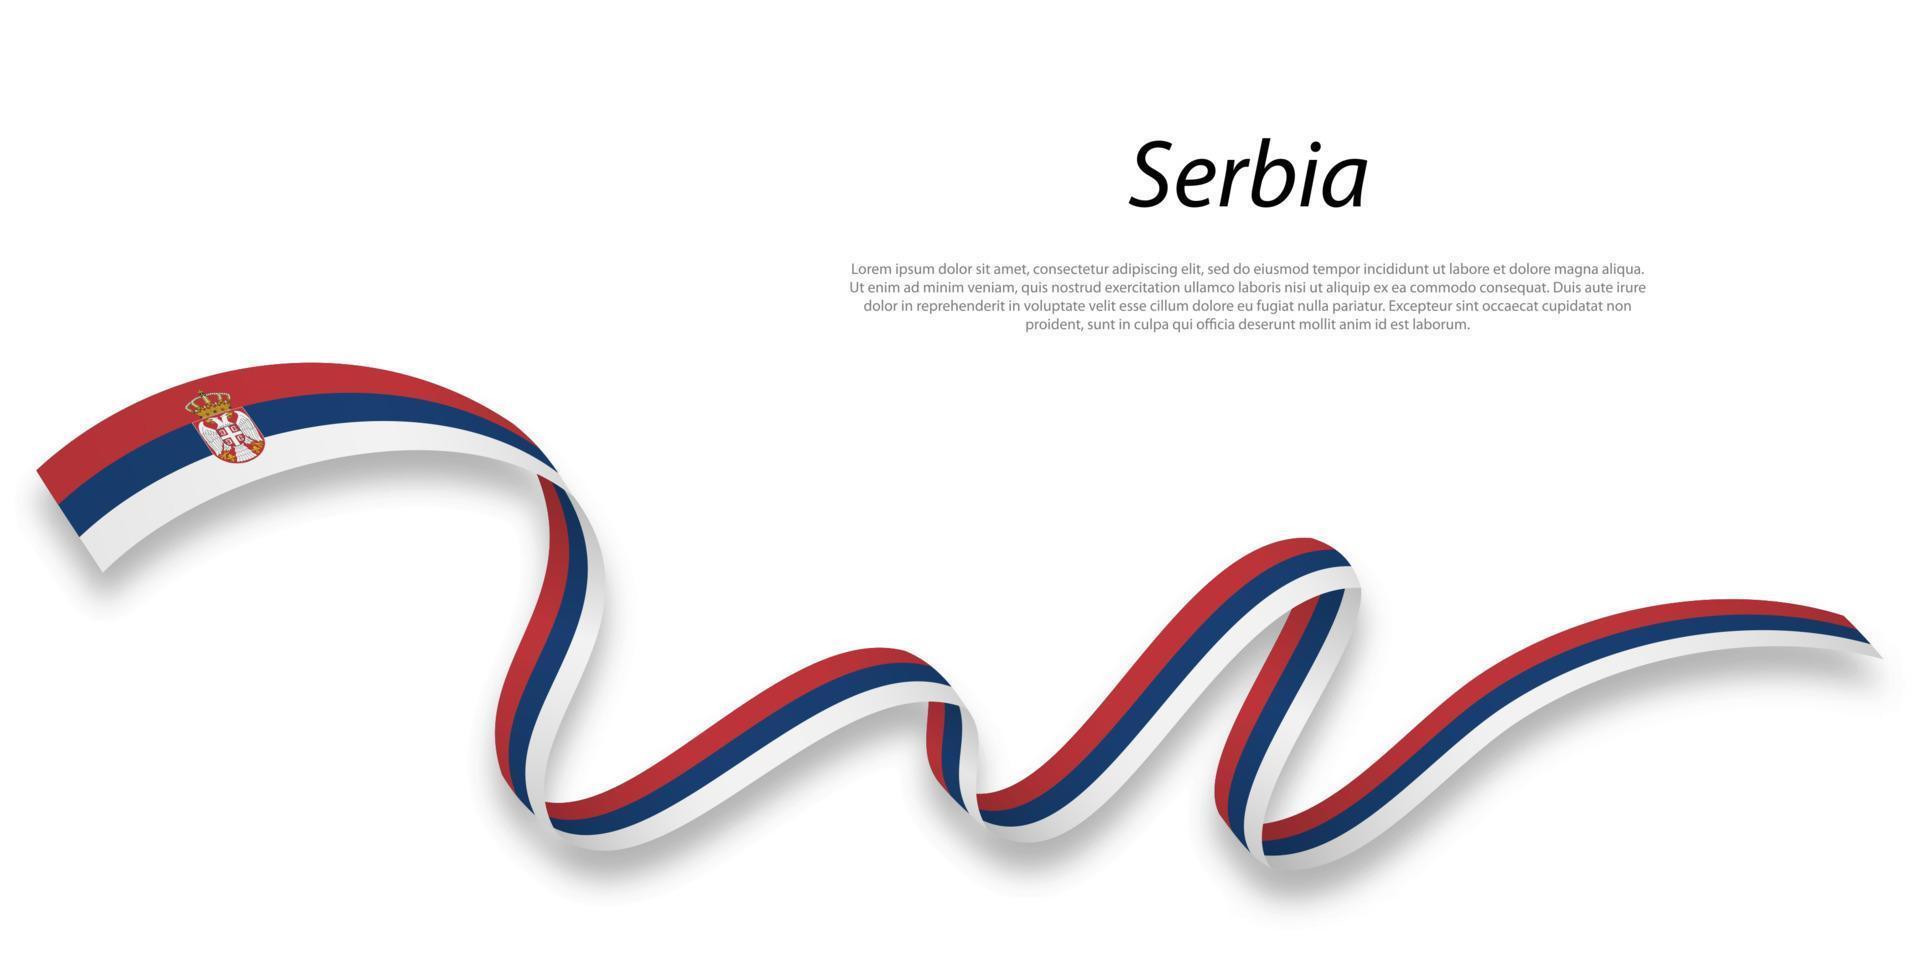 Waving ribbon or banner with flag of Serbia. vector